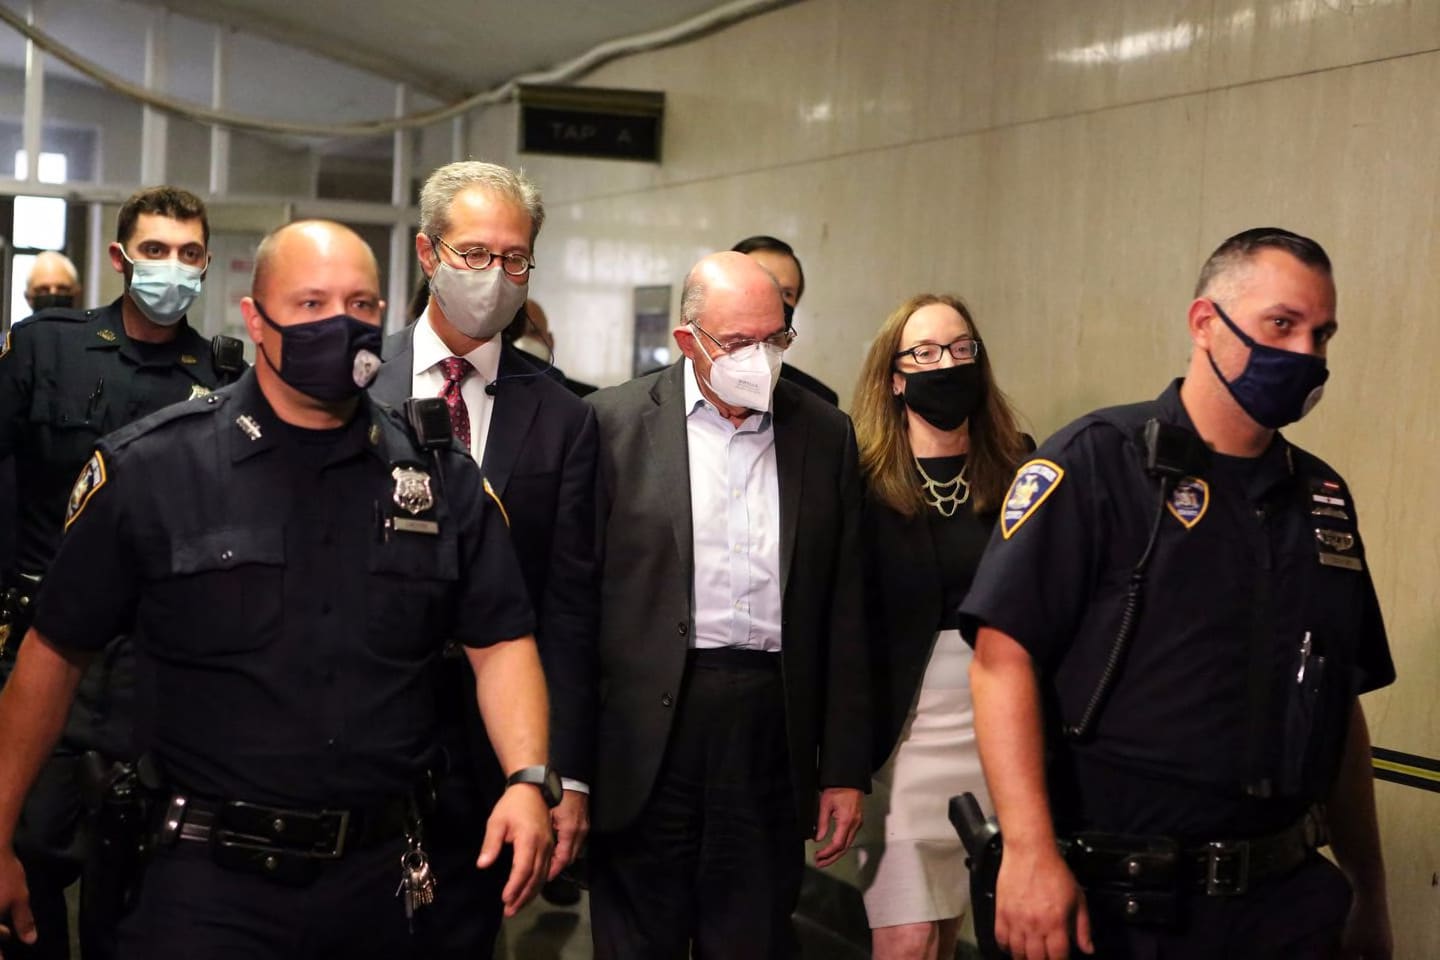 Allen Weisselberg, third from right, Donald Trump’s long-serving chief financial officer, departed court after his arraignment in Manhattan on July 1, 2021, where he faced grand larceny, tax fraud, and other charges.